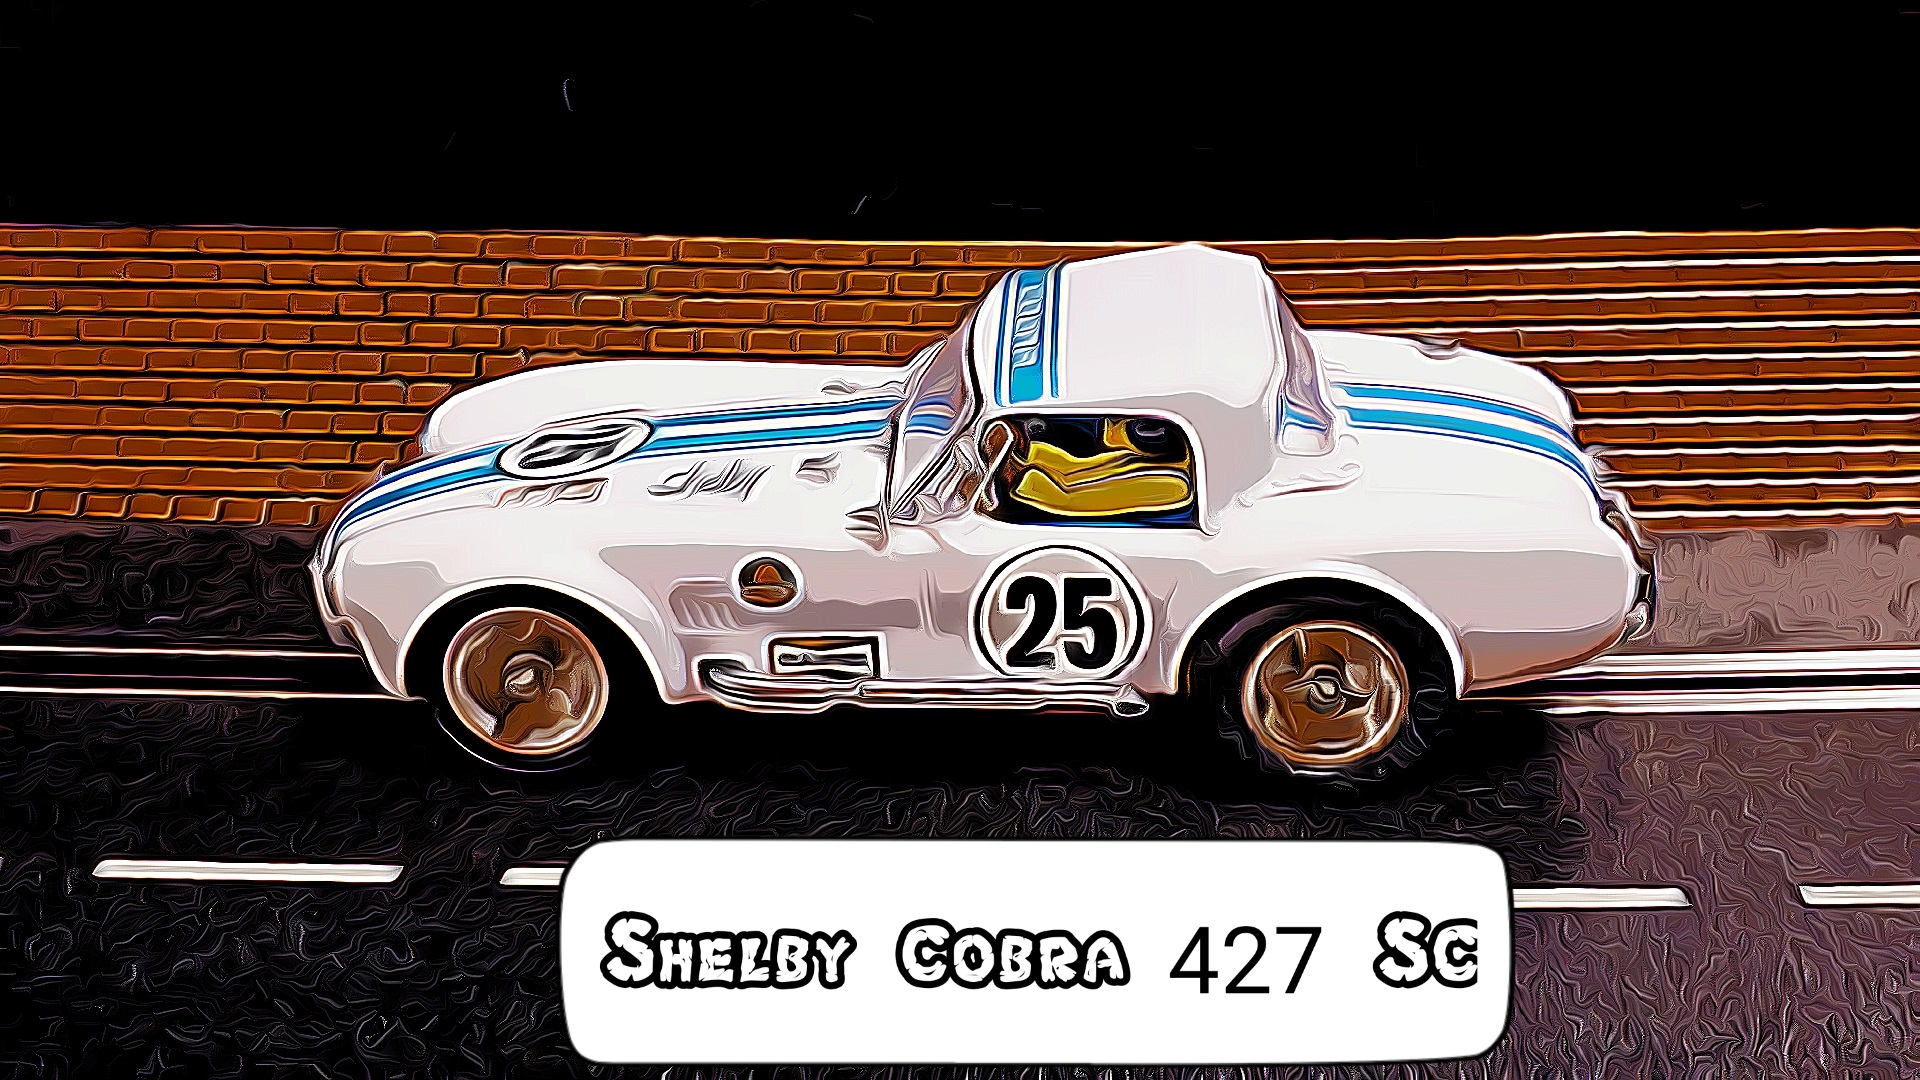 * SOLD * COX Shelby Cobra 427 🐍 Slot Car 1:24 Scale Car 25 in White